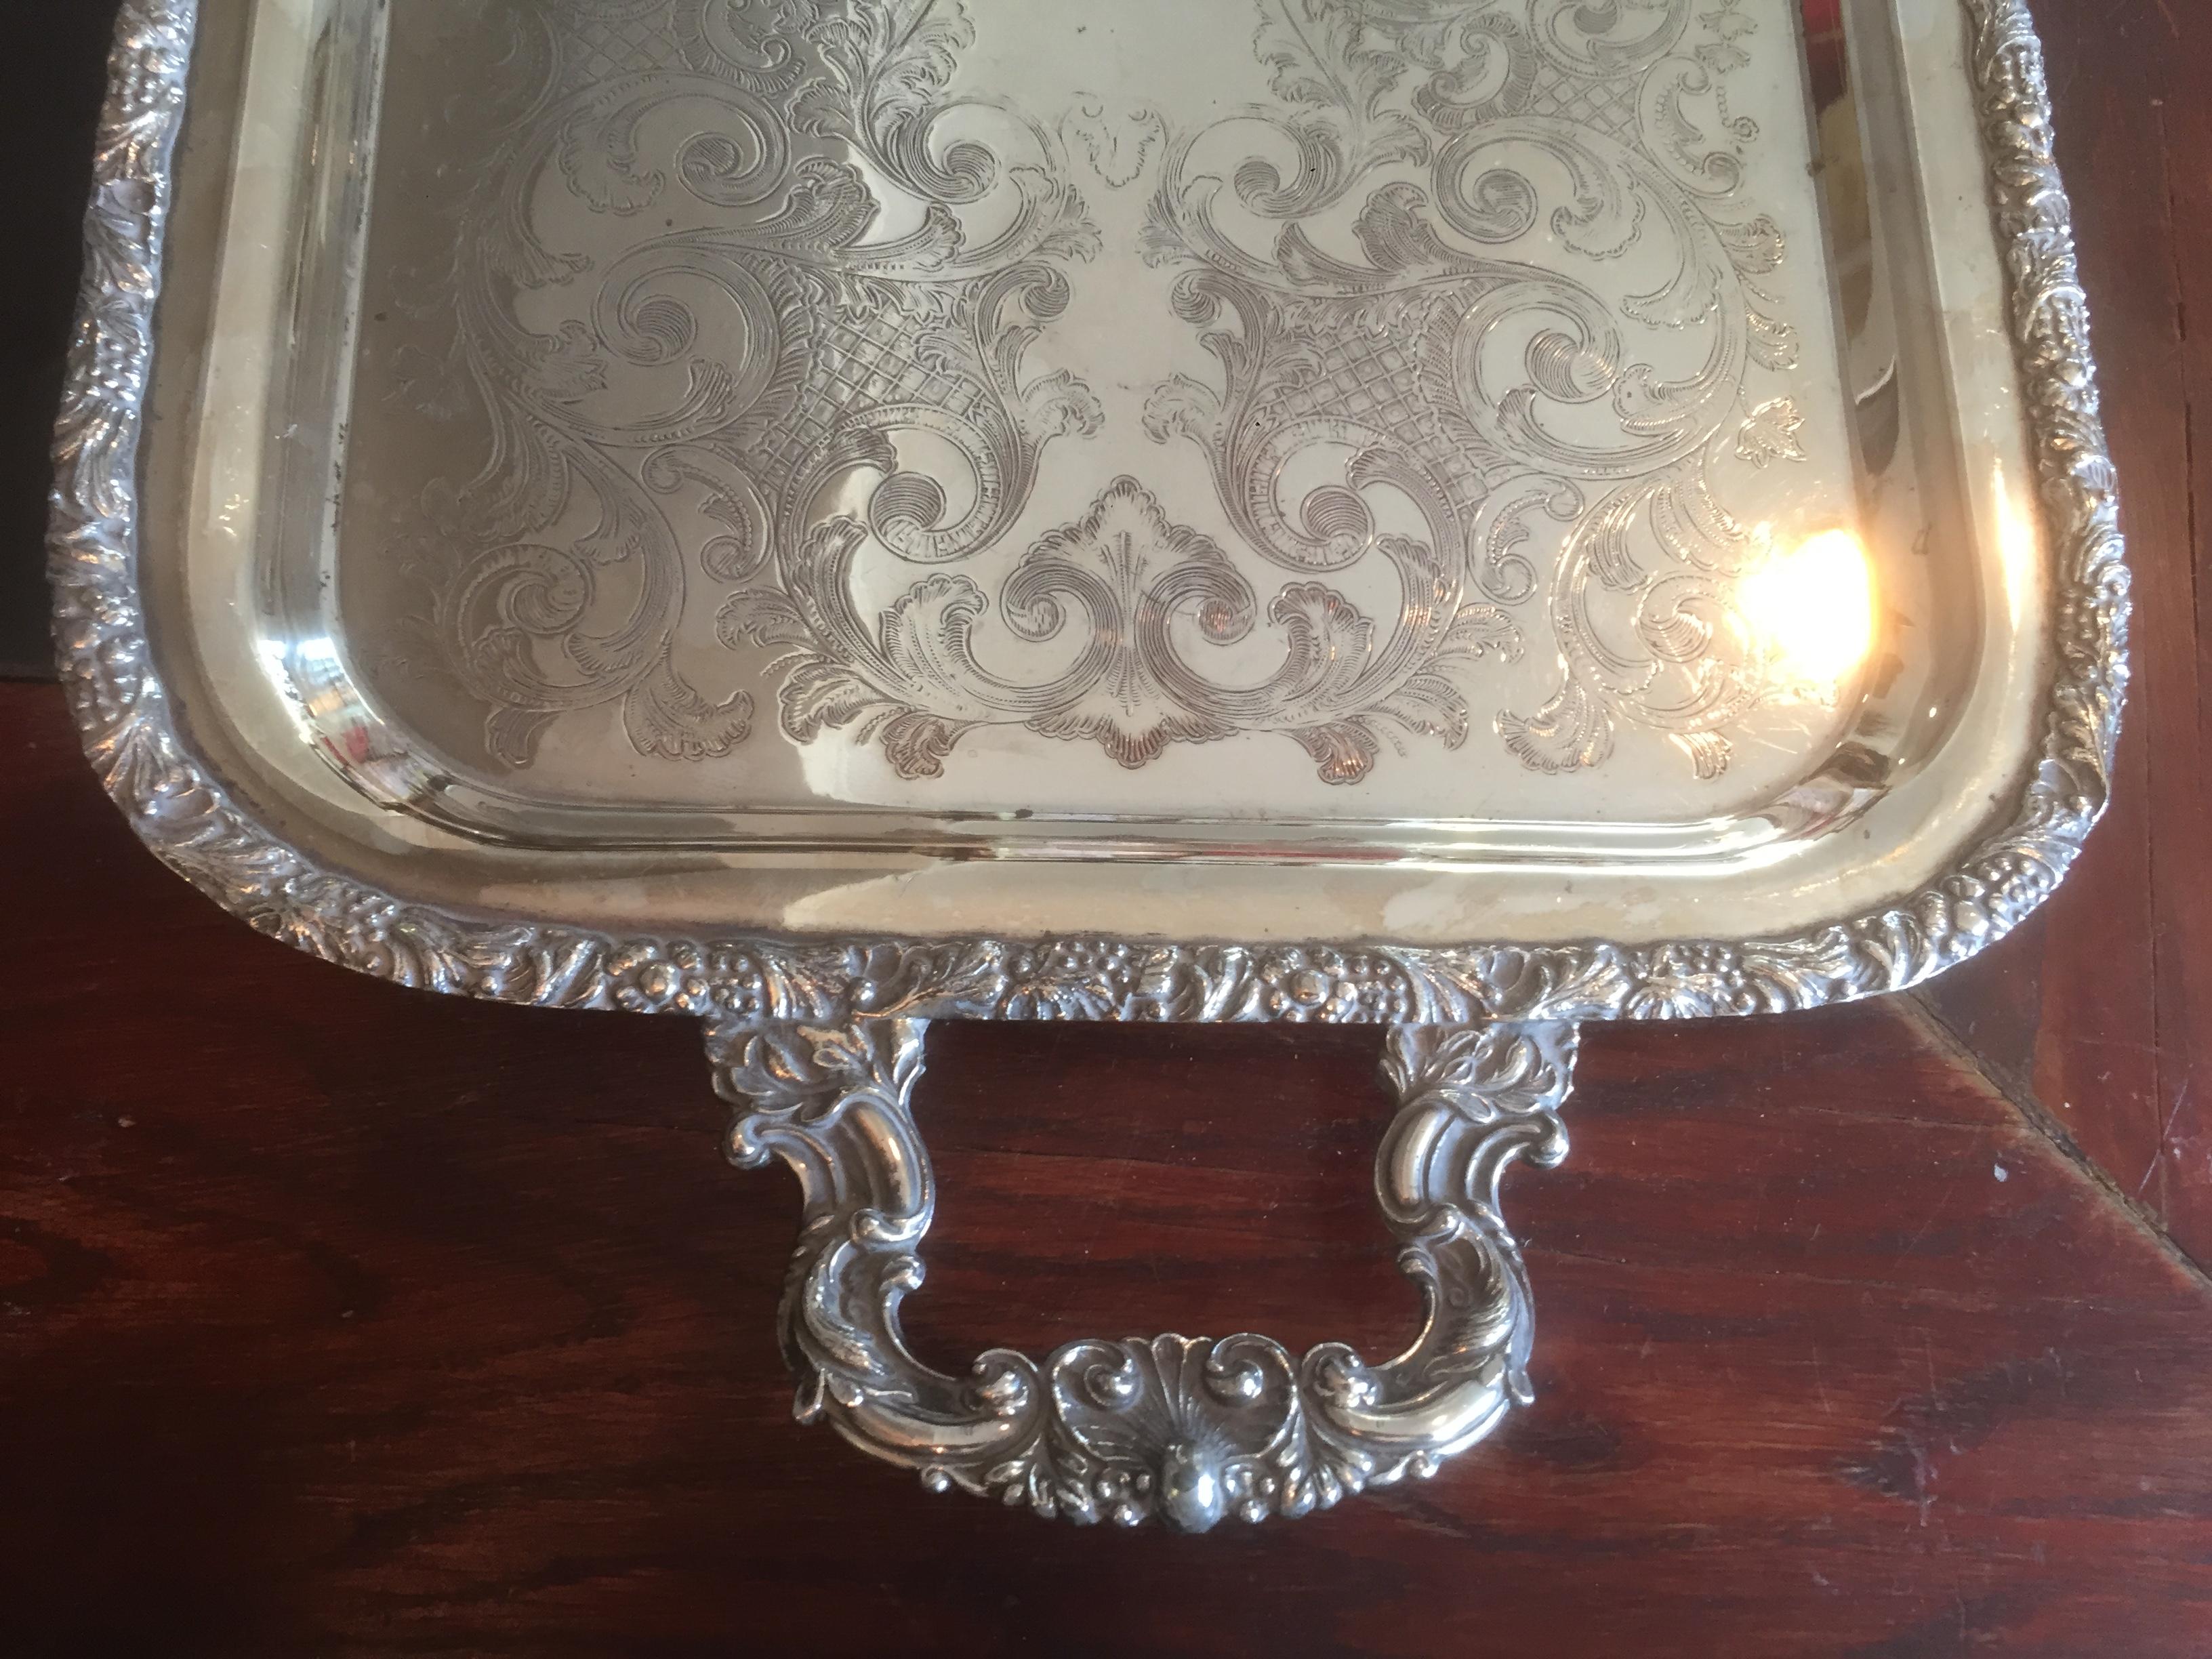 Canadian Mid-20th Century Oneida Silver Plated Engraved Details Tray, 1930s